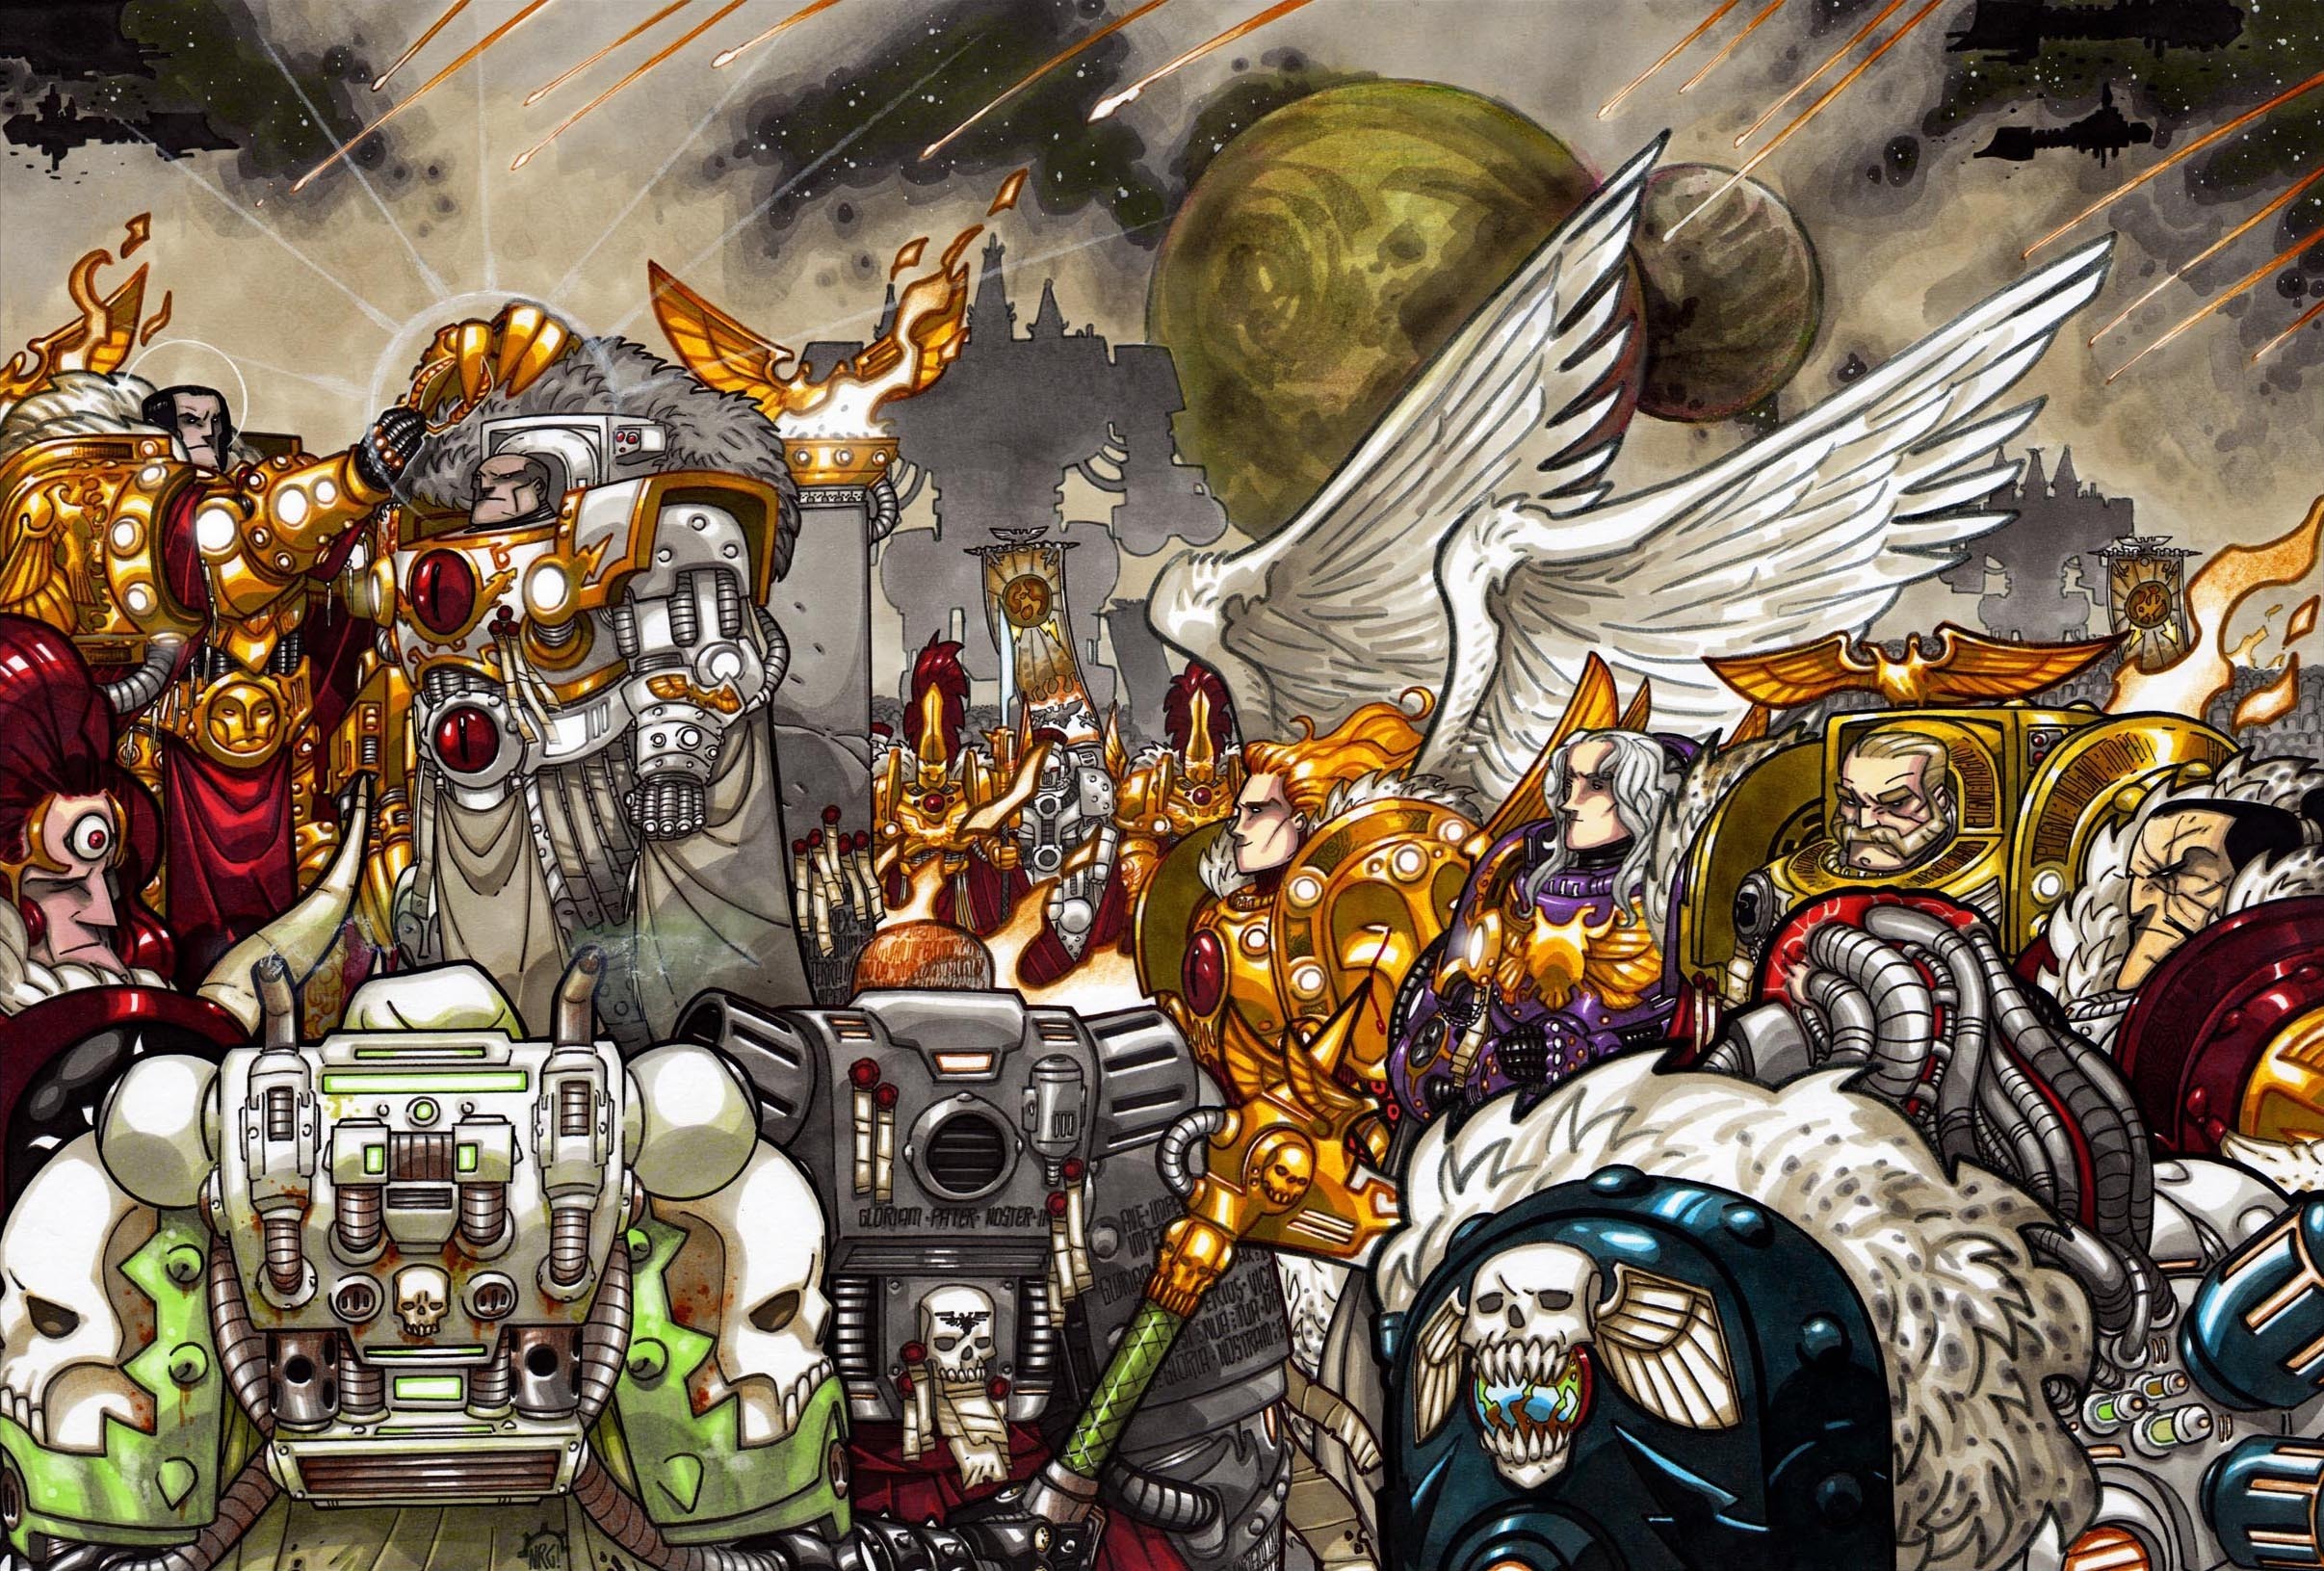 The epic battle of Warhammer 40k's Horus Heresy unleashed on your screen.